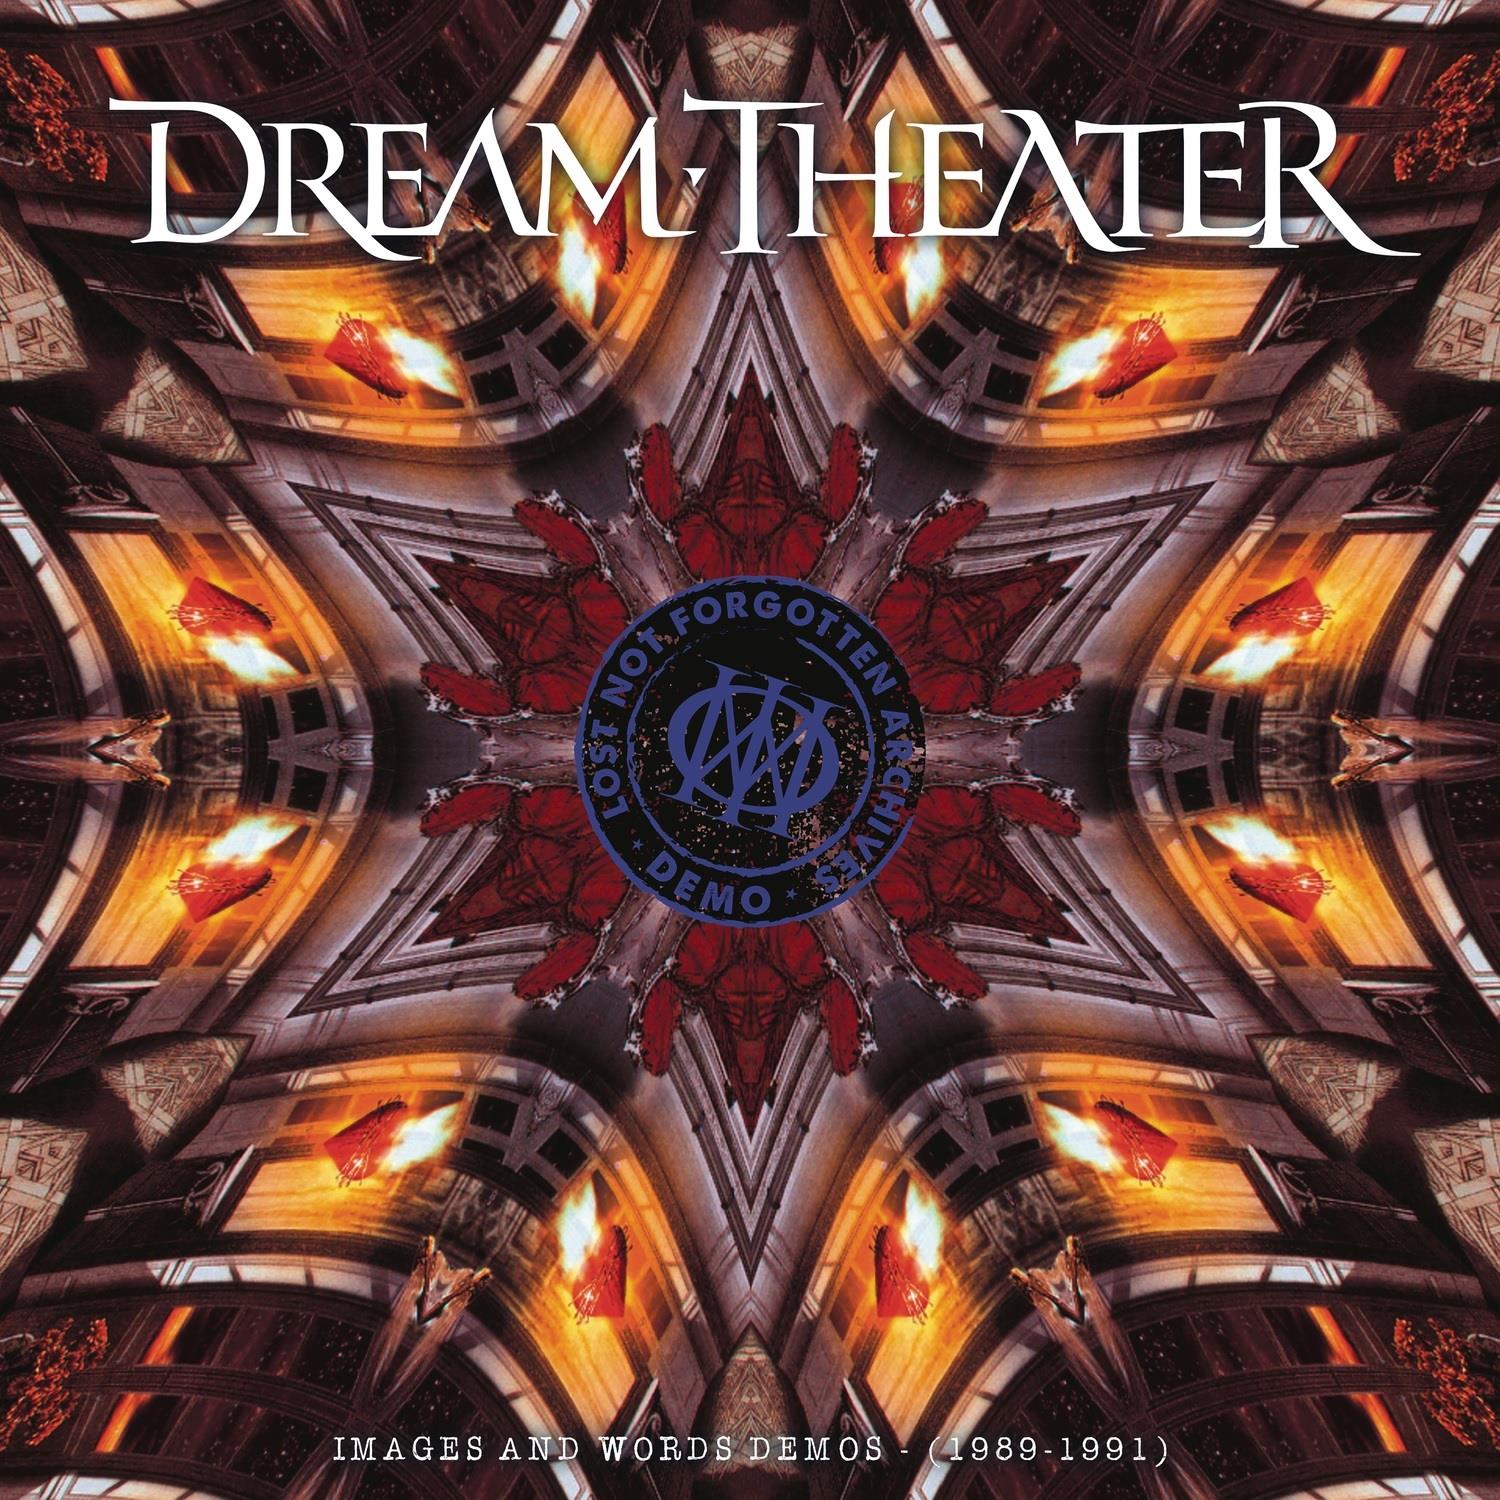 Lost Not Forgotten Archives: Images And Words Demos (1989-1991) by Dream Theater (CD)